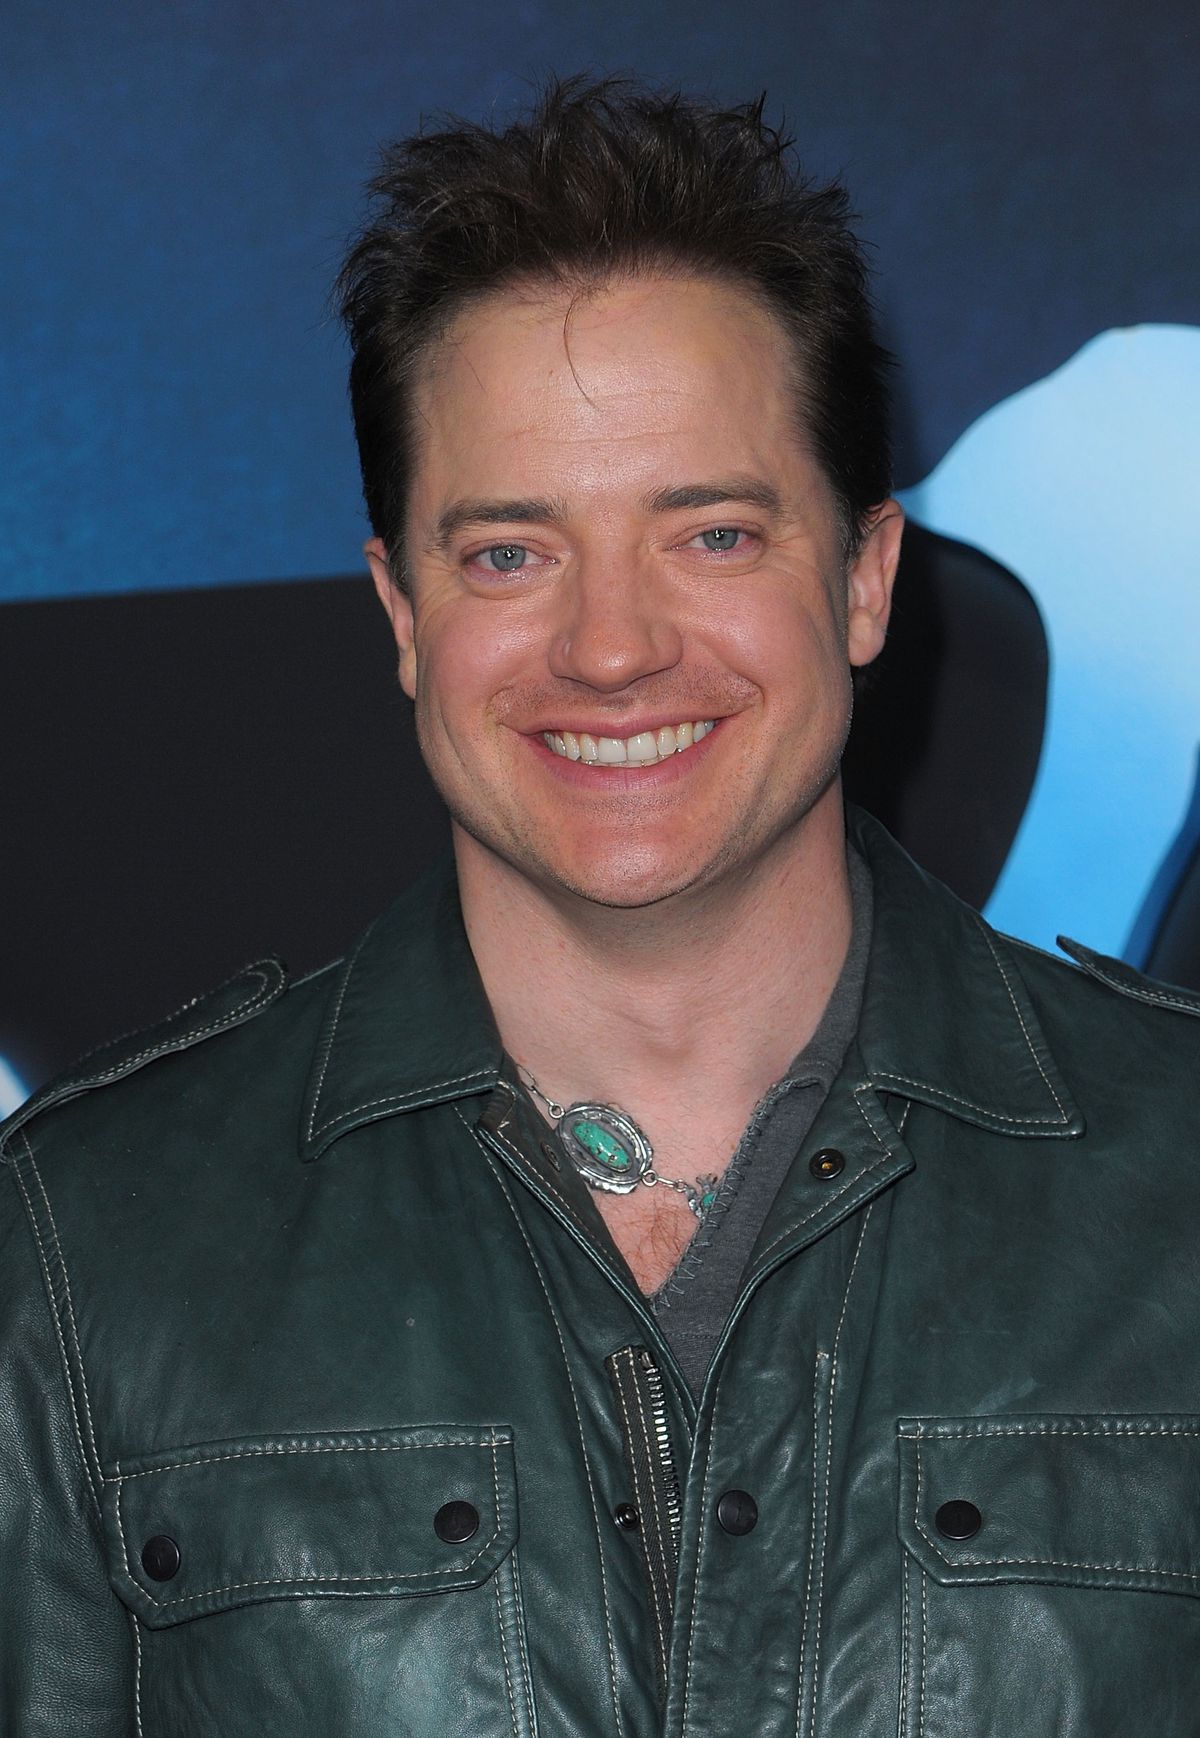 Brendan Fraser wears a large green necklace and leather jacket at the Avatar premiere